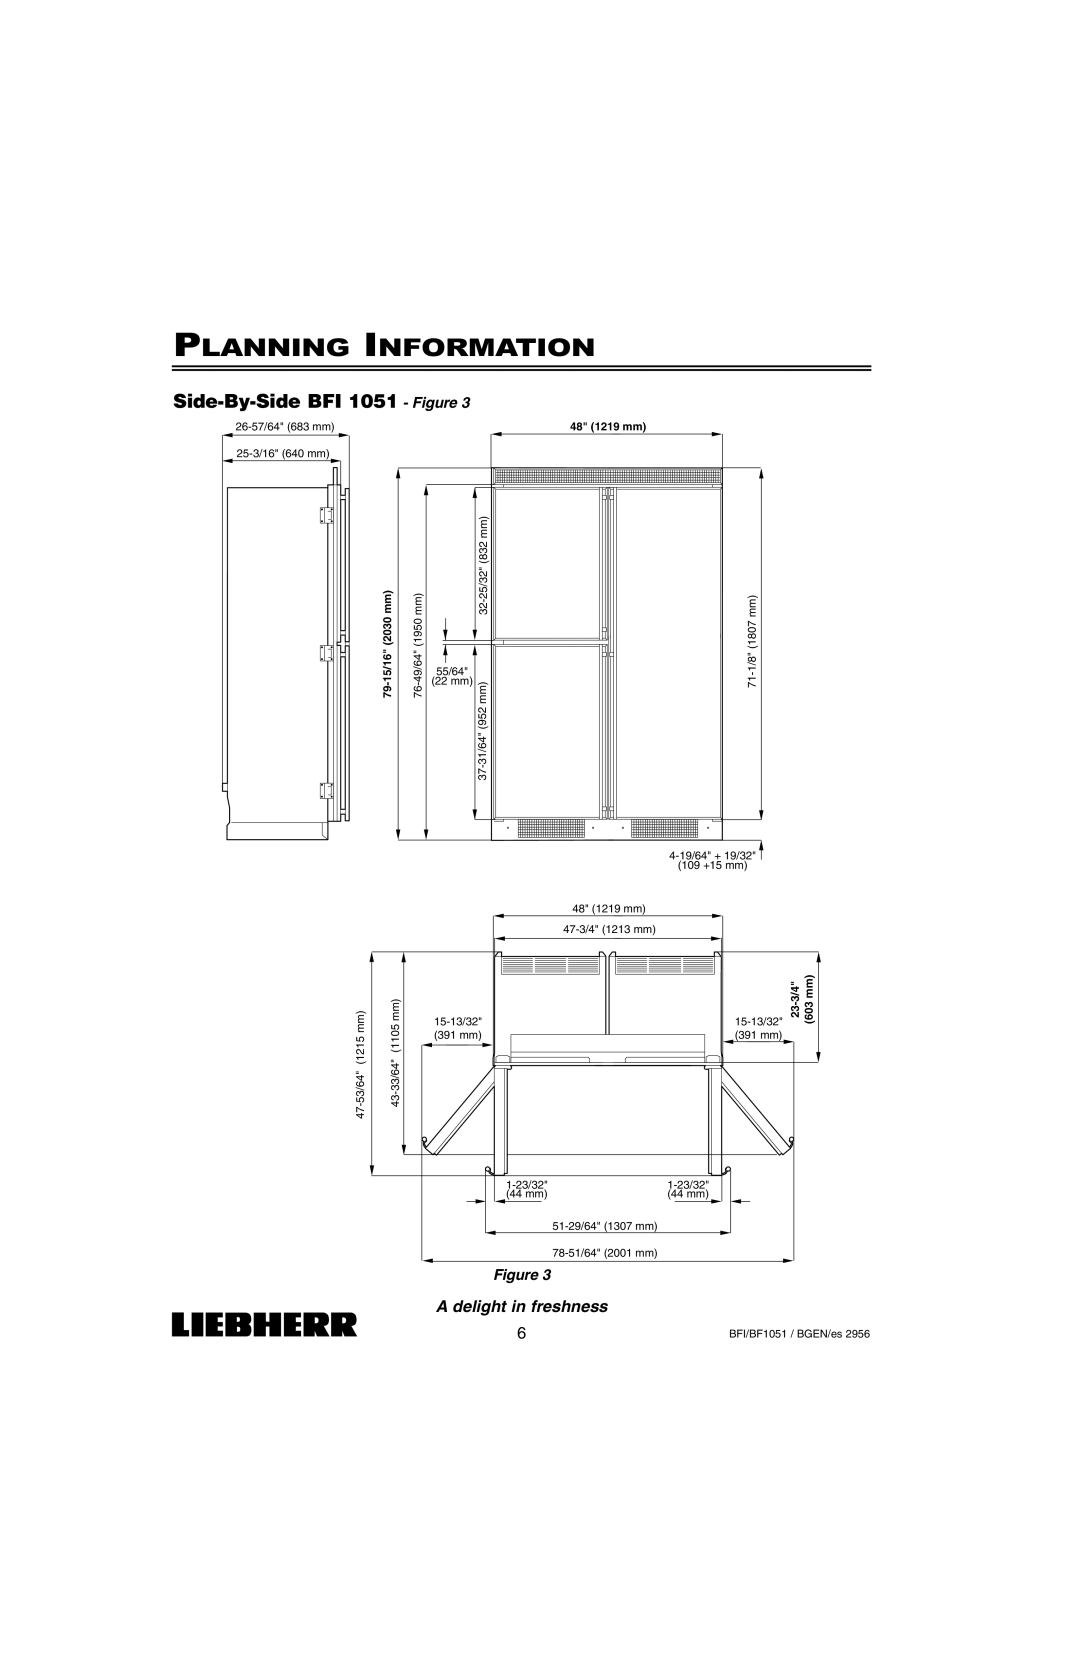 Liebherr BFI1051 Side-By-SideBFI 1051 - Figure, Planning Information, A delight in freshness, 79-15/162030 mm, 48 1219 mm 